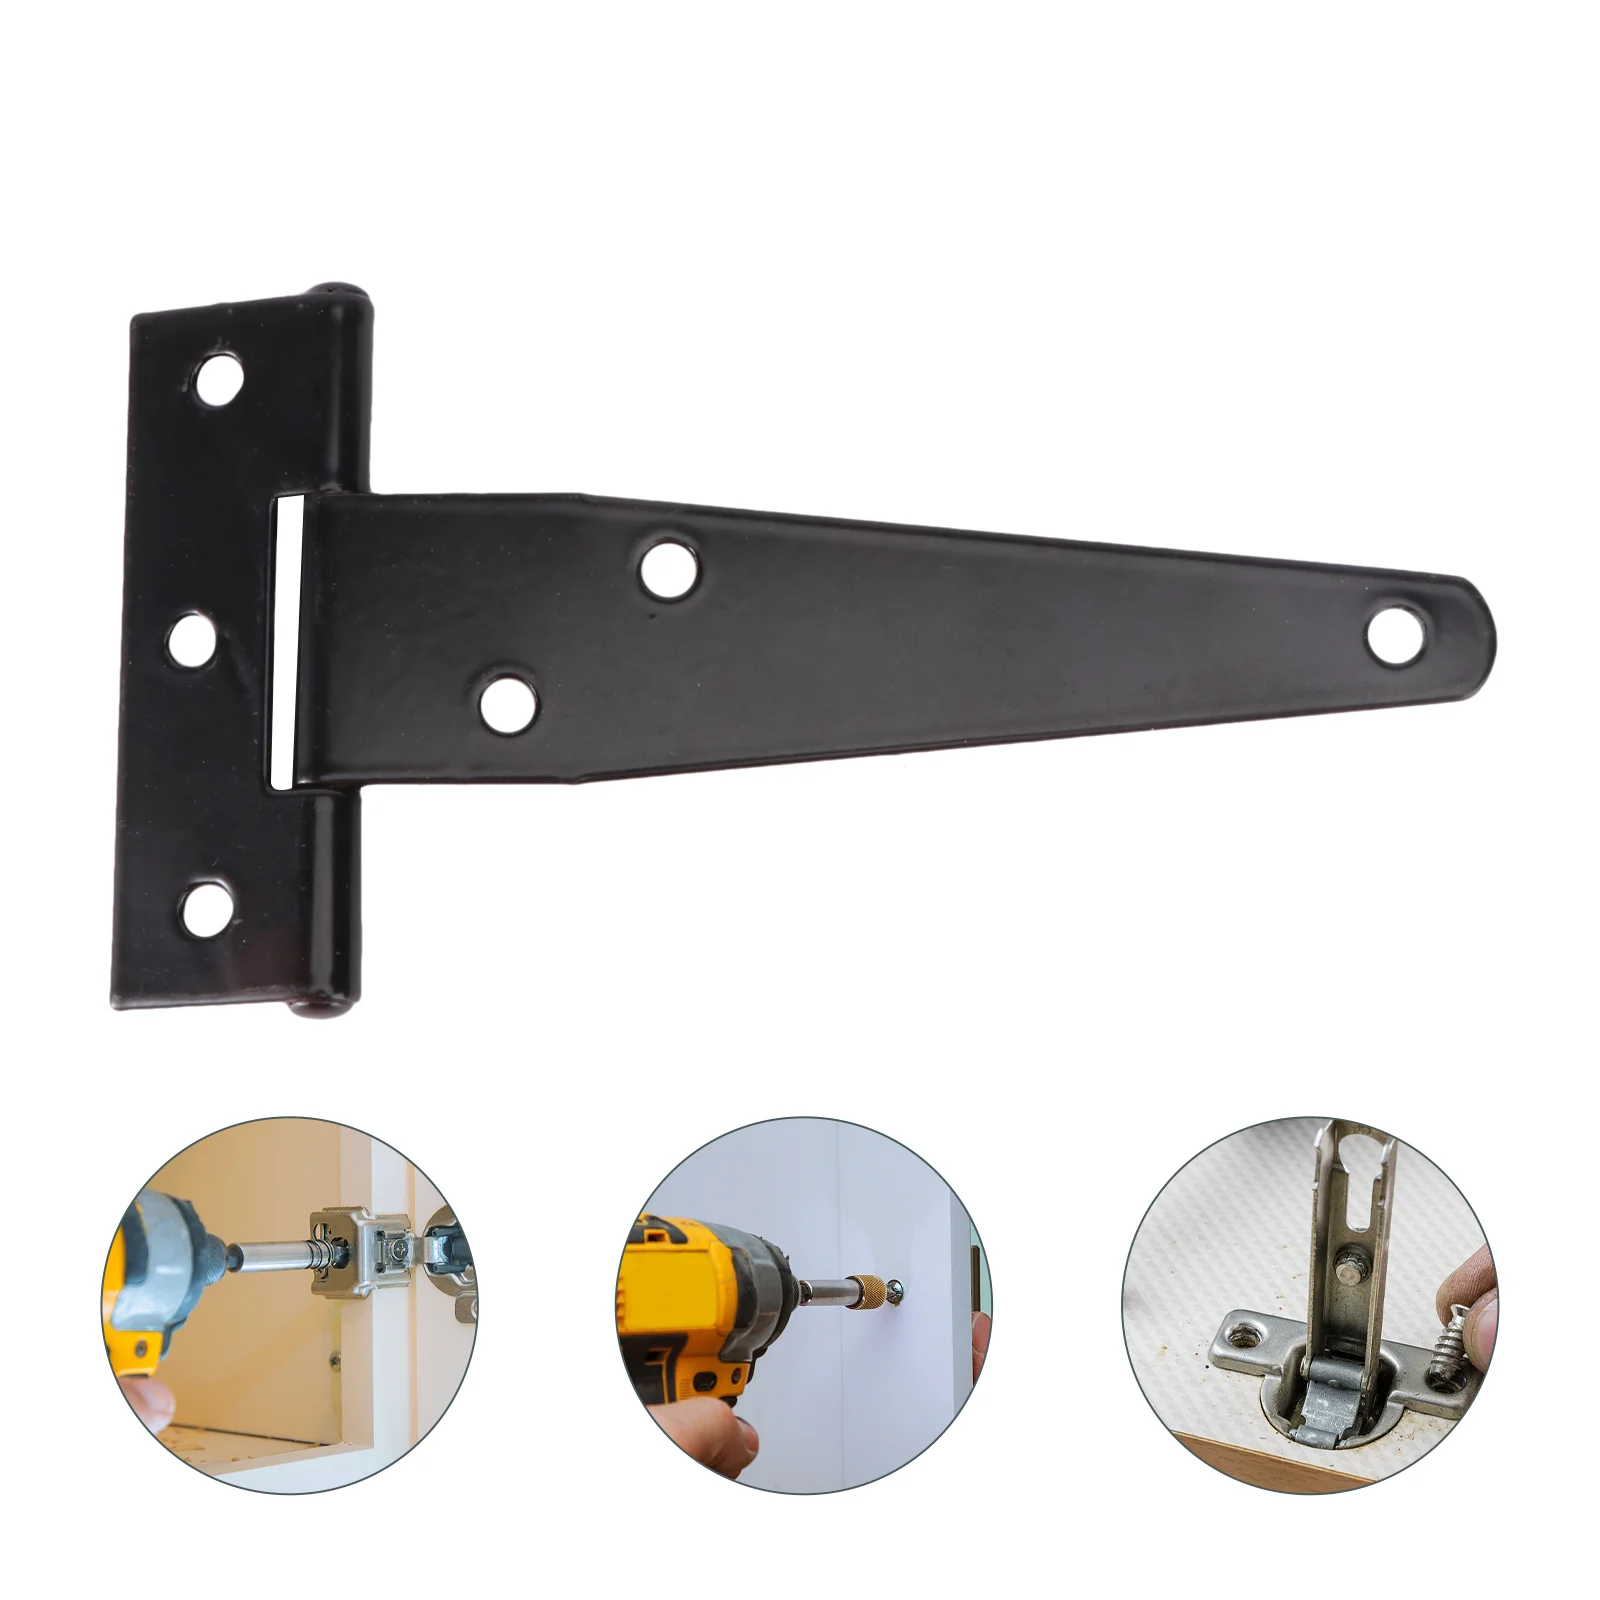 

6pcs 4 Inch T Strap Heavy Duty Shed Hinge Gate Strap Hinge Door Barn Gates Hinges Black Wrought For wooden doors